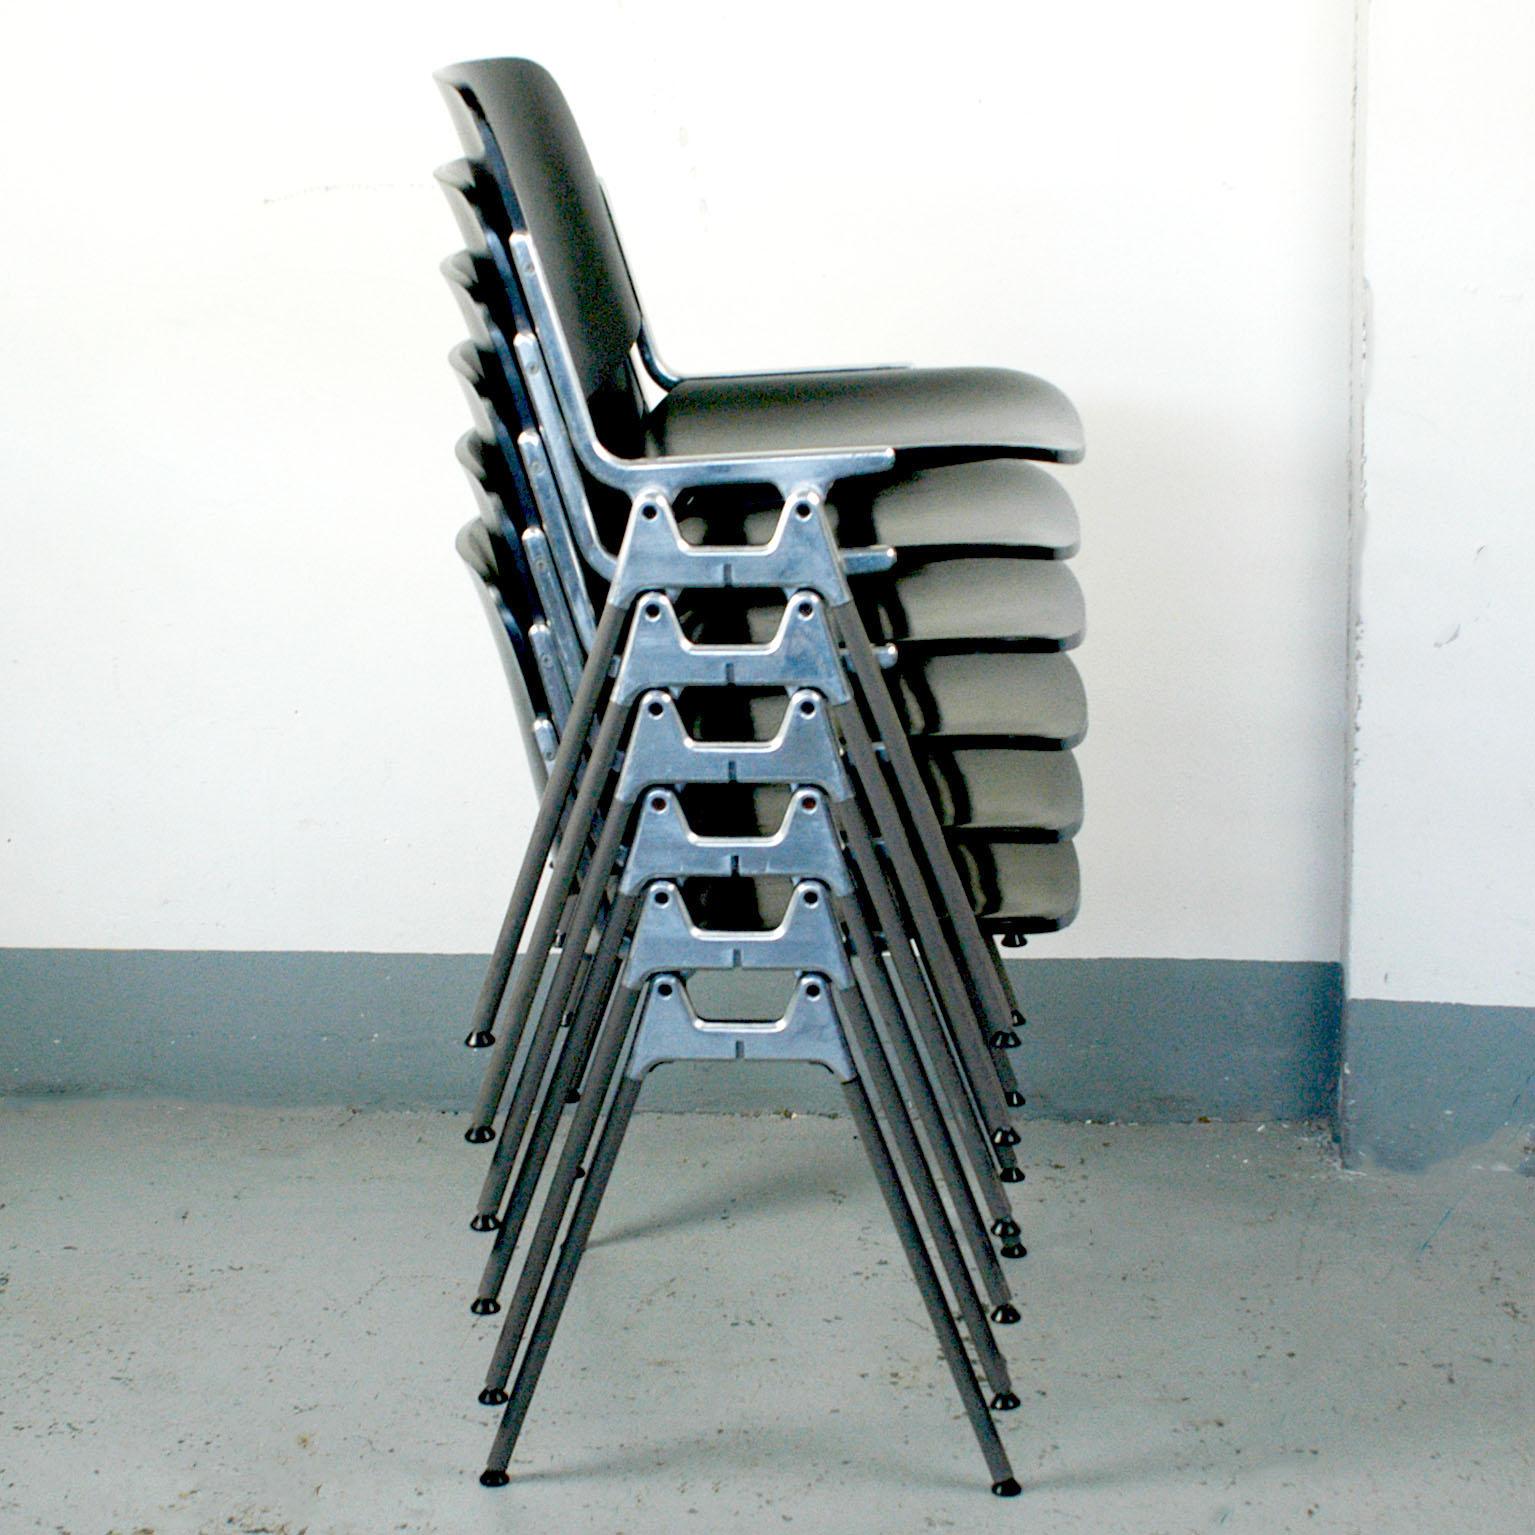 Set of six iconic DSC 106 stacking chairs, designed 1965 by Giancarlo Piretti for Castelli. This set features black lacquered seats and backs they are in very nice condition with a few signs of wear due to their age. Perfect and stylish to use as